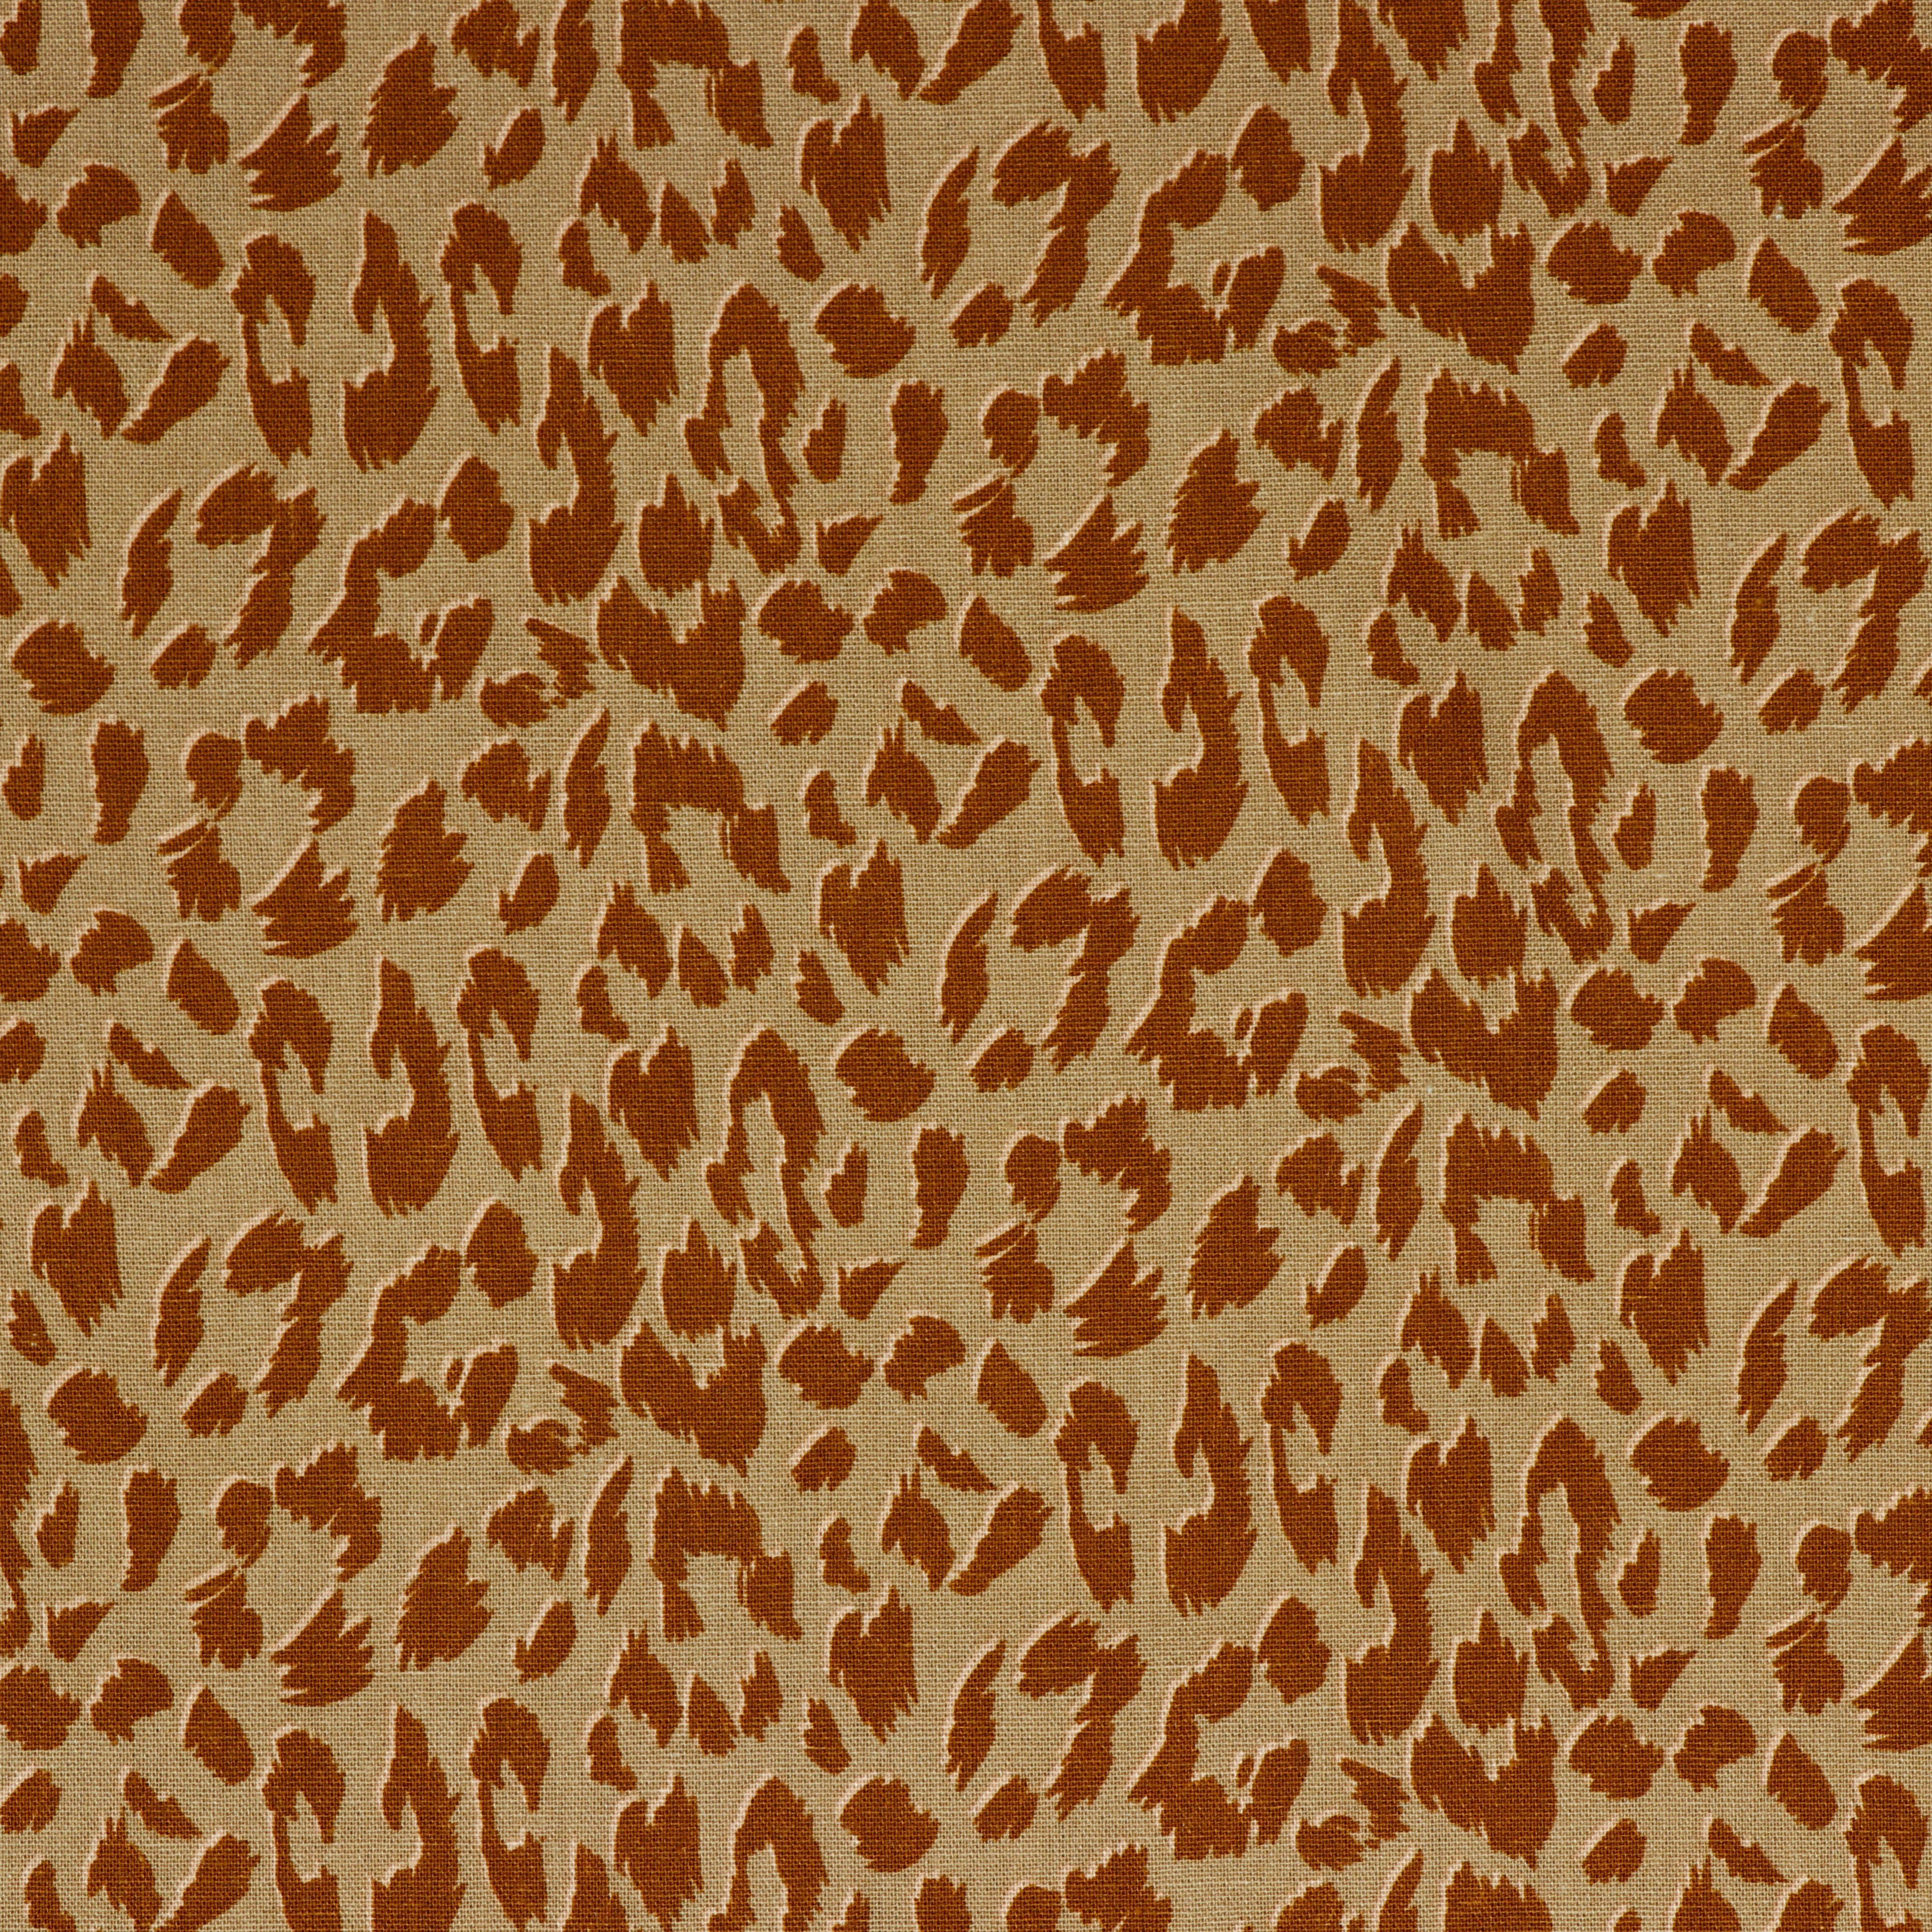 REMNANT 1.40 metres - Animal Print on Sand Linen Viscose Blend Fabric.